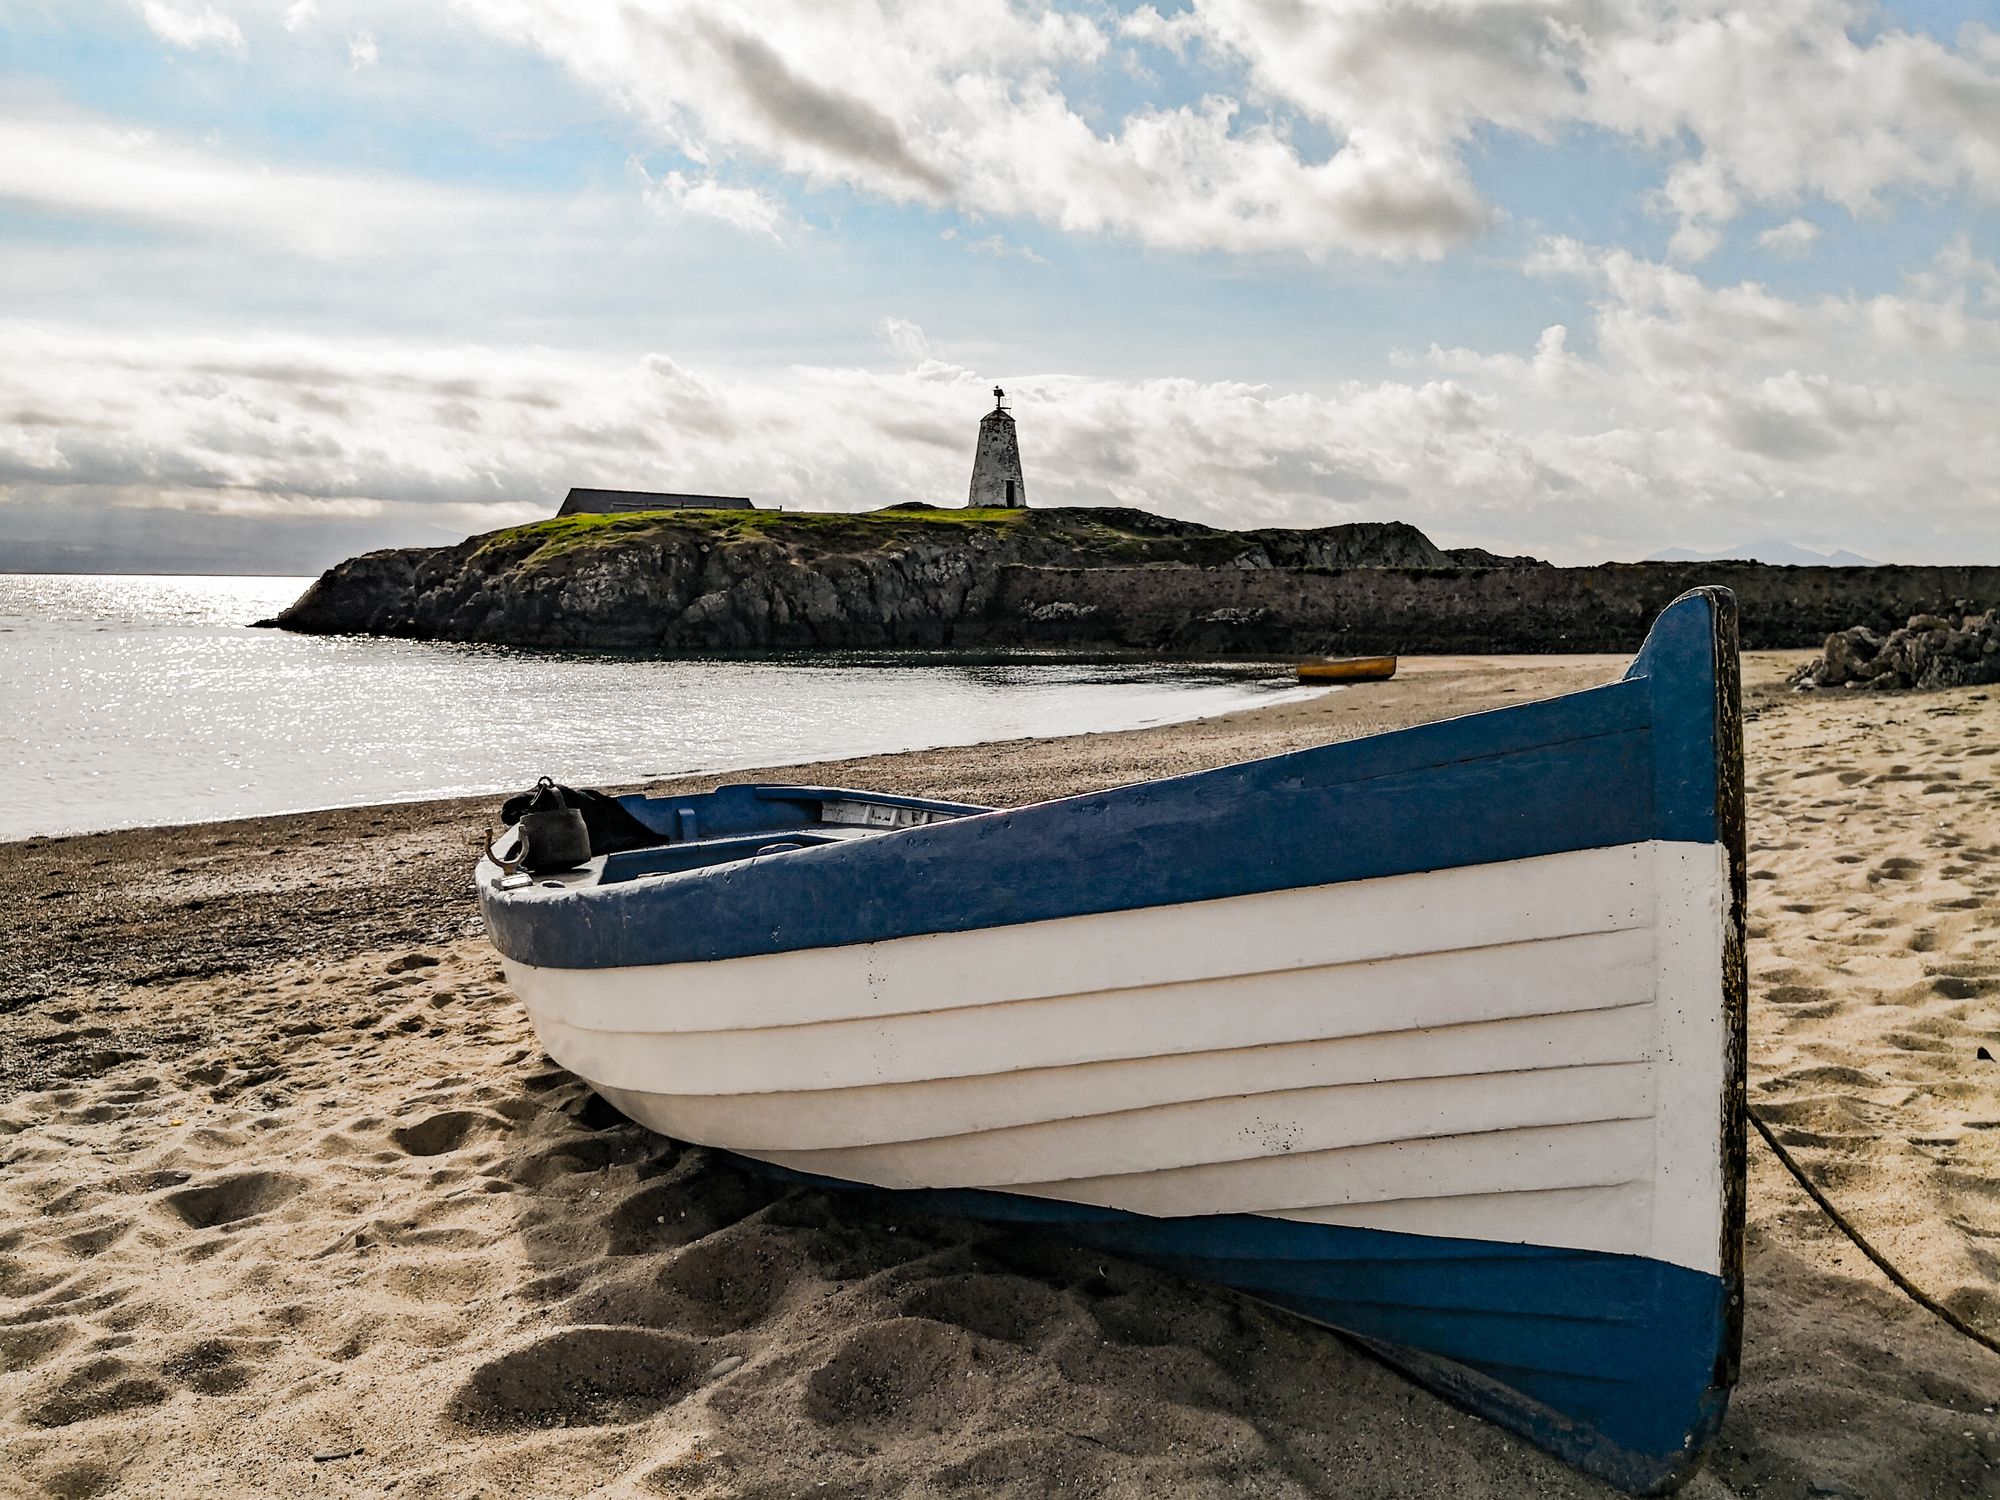 Ship moored on beach against sky, photo taken in Bangor, Northern Ireland. Image: Getty. 